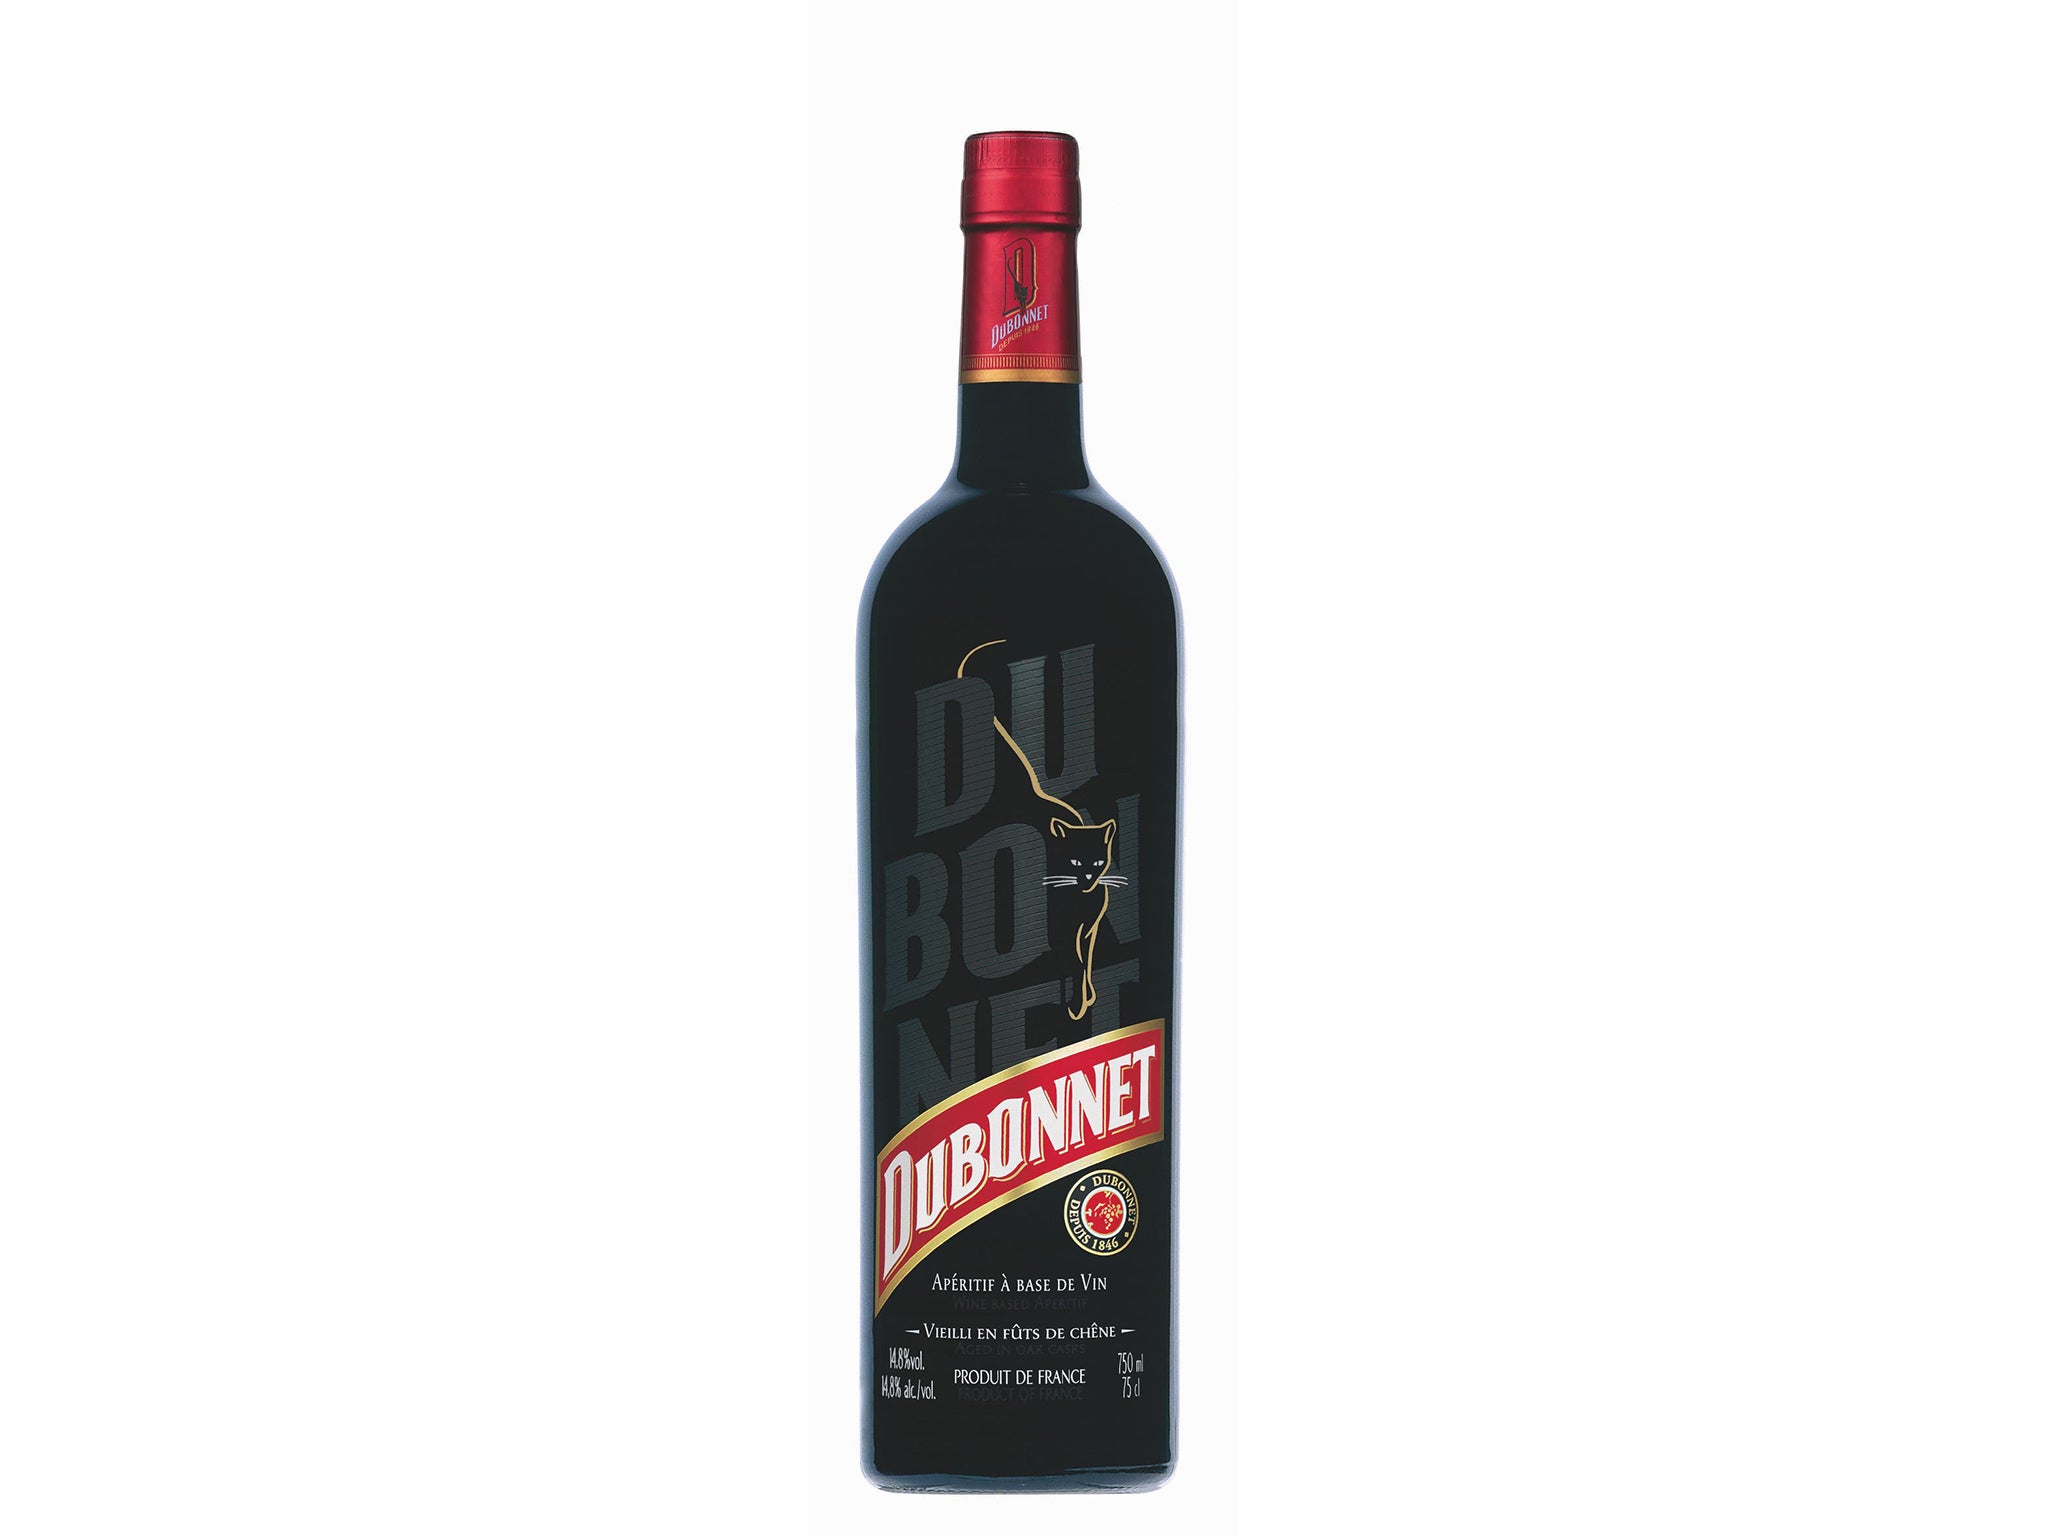 The base for a perfect martini is vermouth, and we loved this Dubonnet version